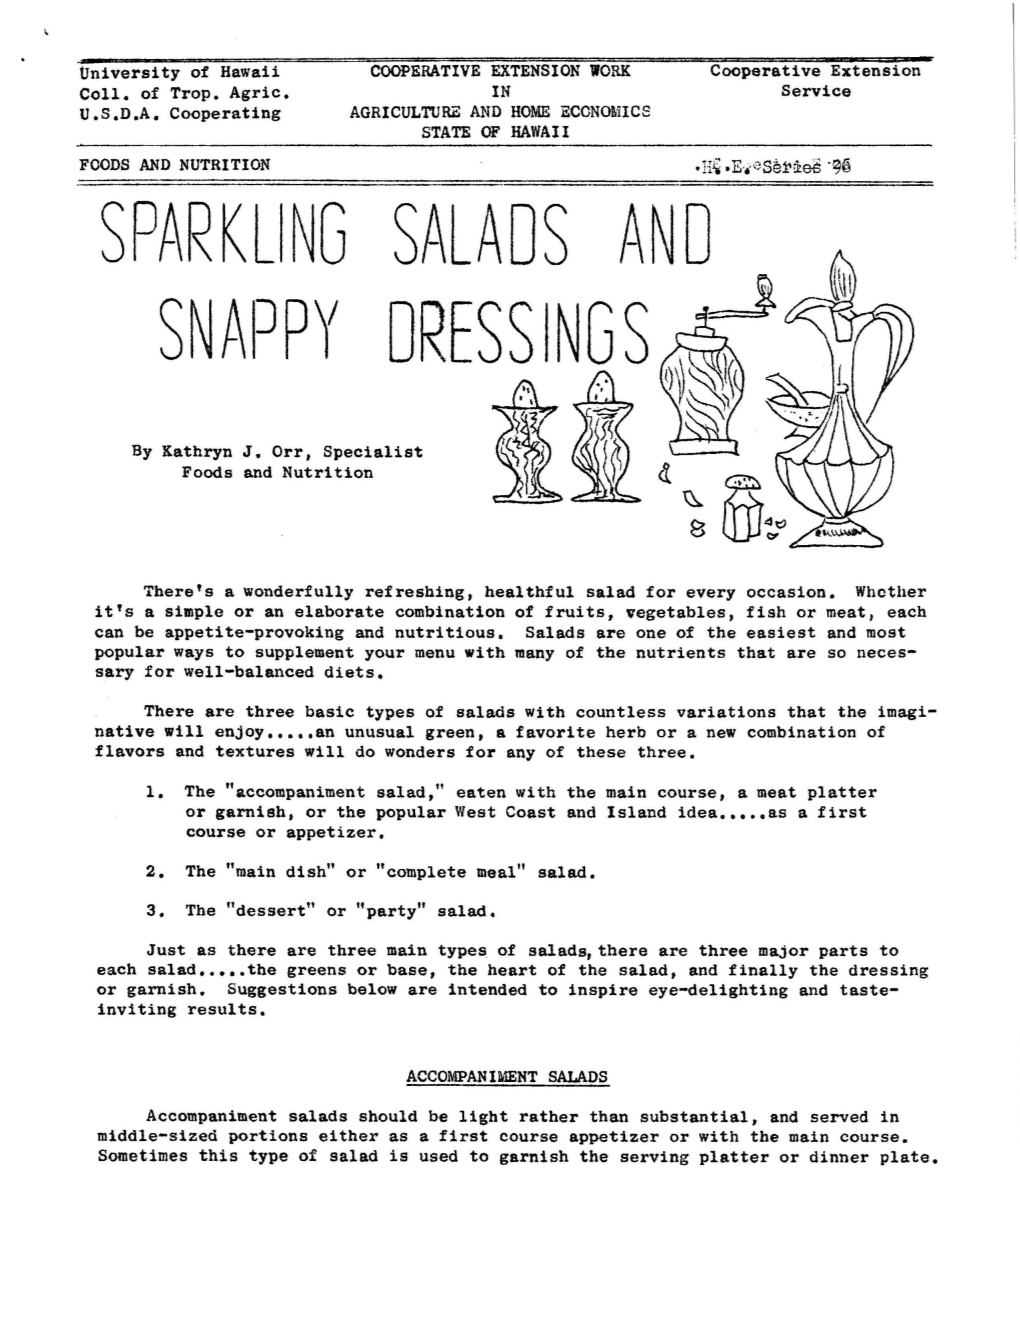 Sparkling Salads and Snappy Dressings